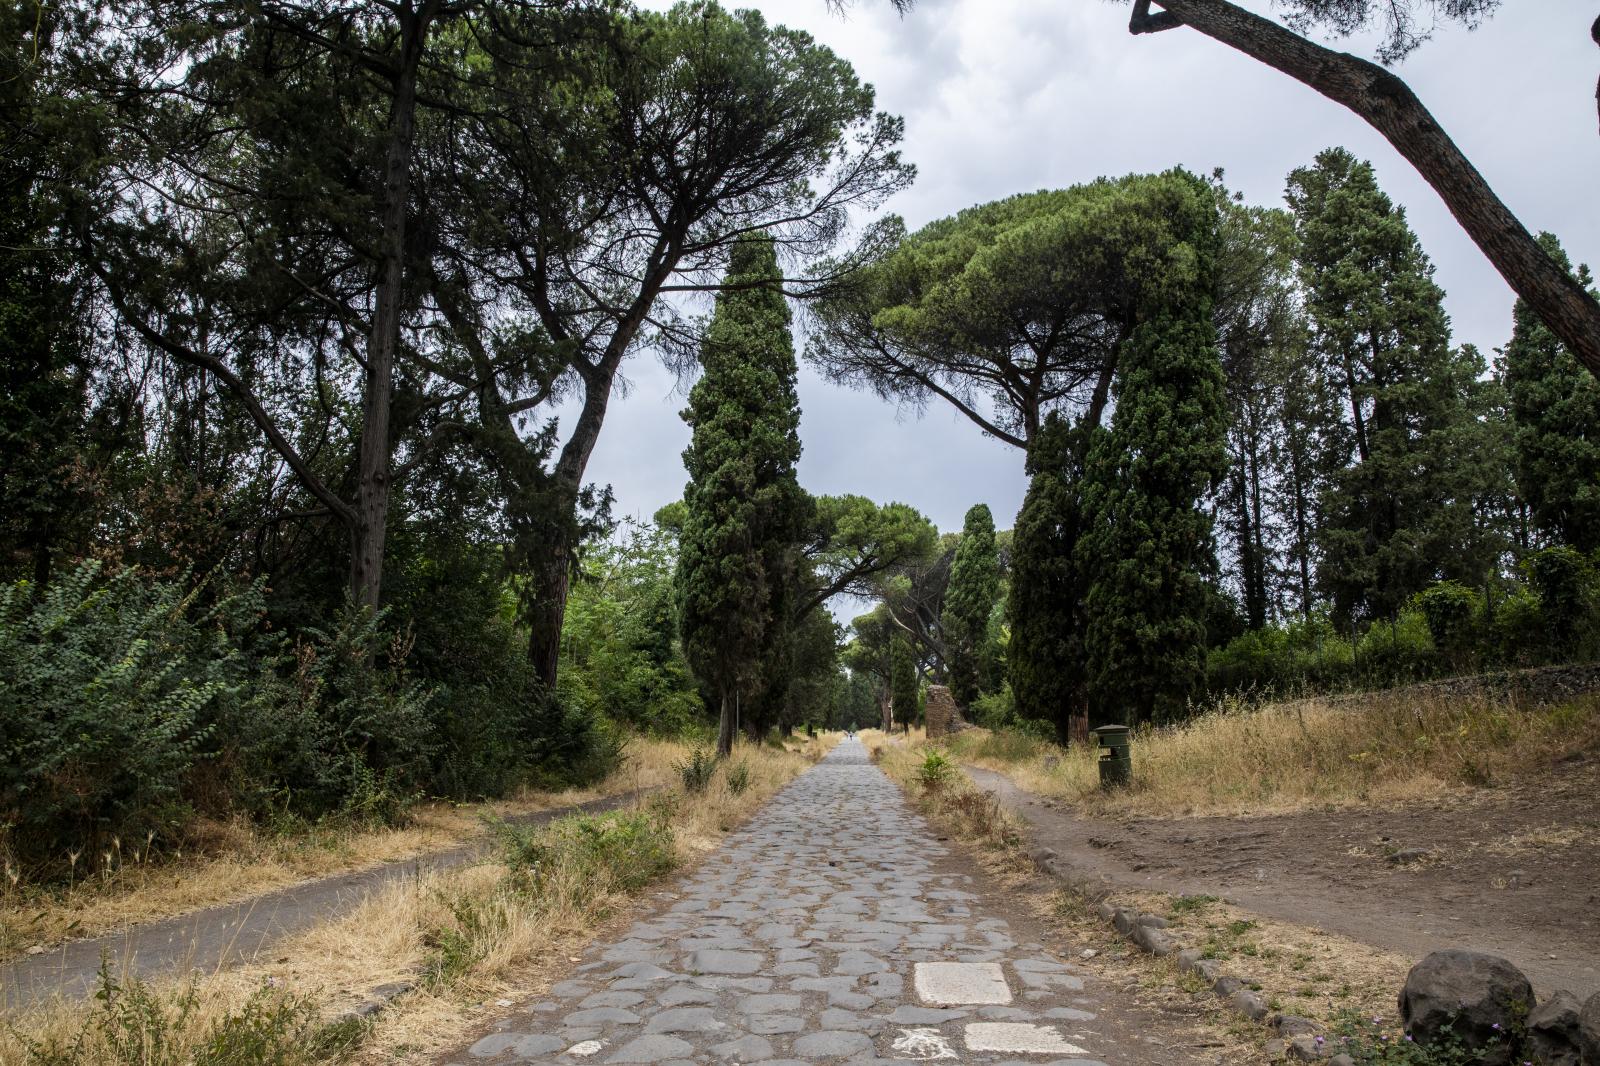 The Appian Way - Europe's First Superhighway